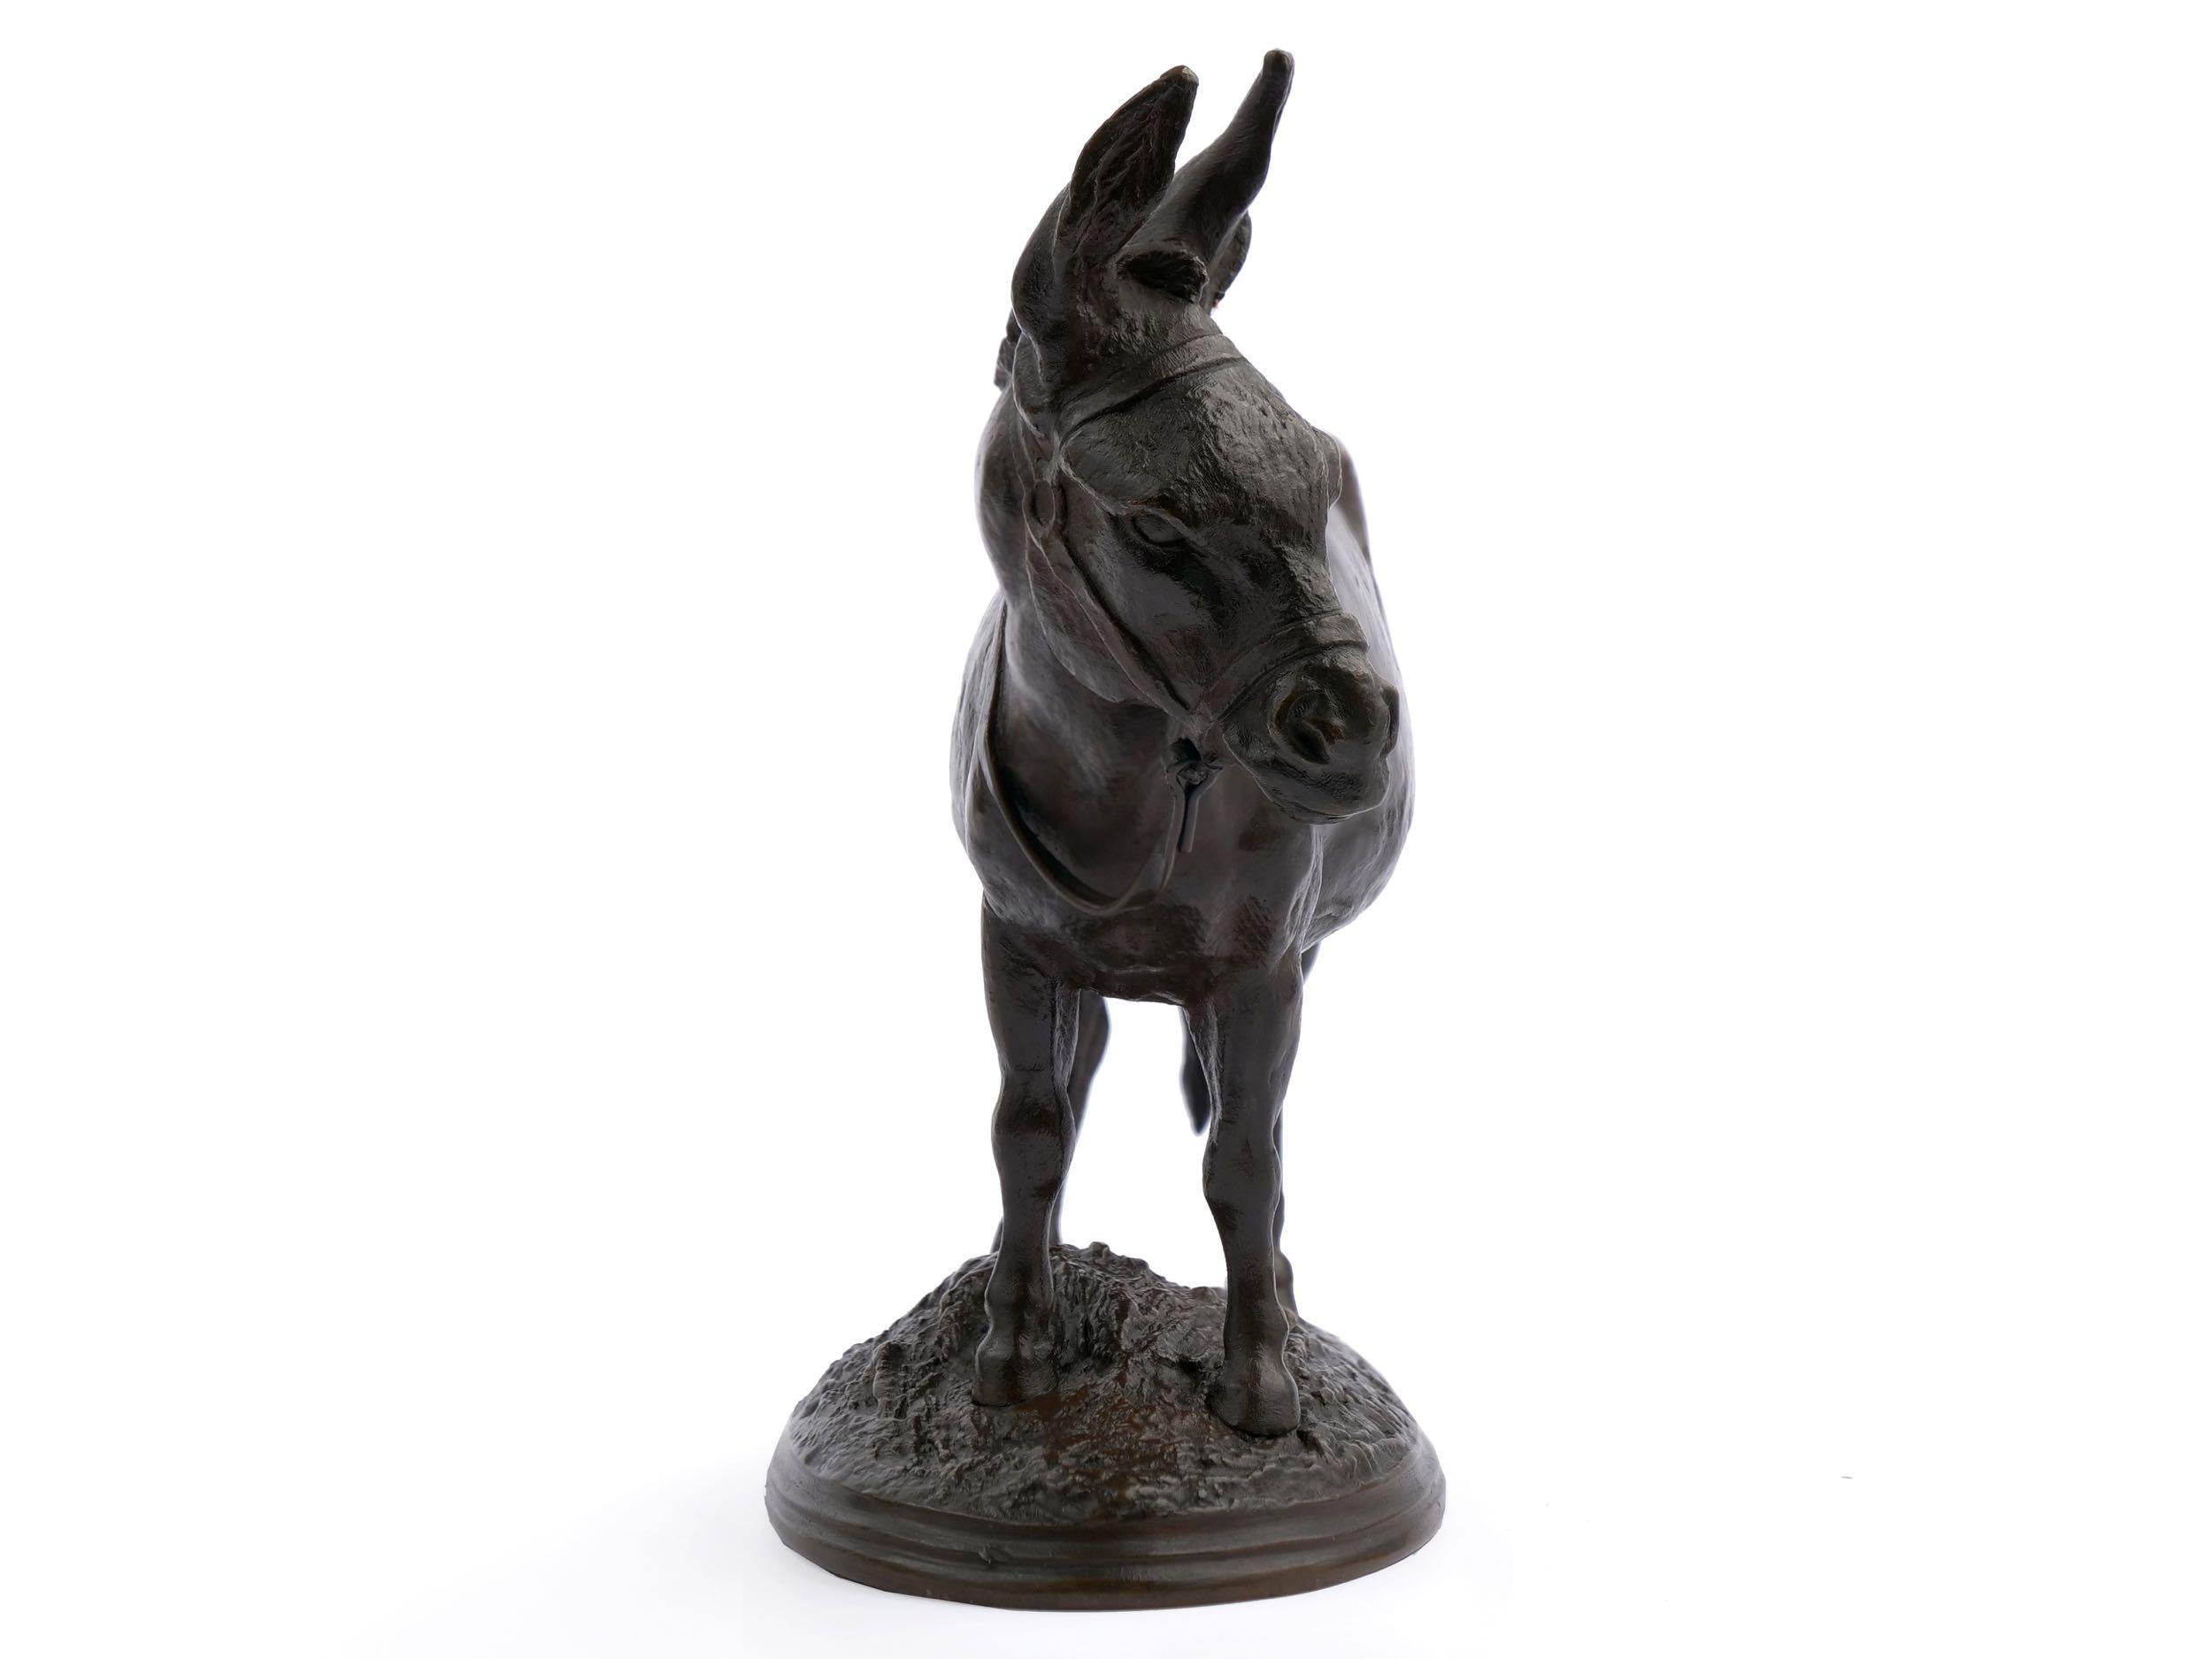 A rare and exquisite model of an African Donkey by Auguste Nicholas Cain, this very finely detailed model is one of two variations Cain developed for this work, one with the donkey carrying a woven basket strapped across its back and the present